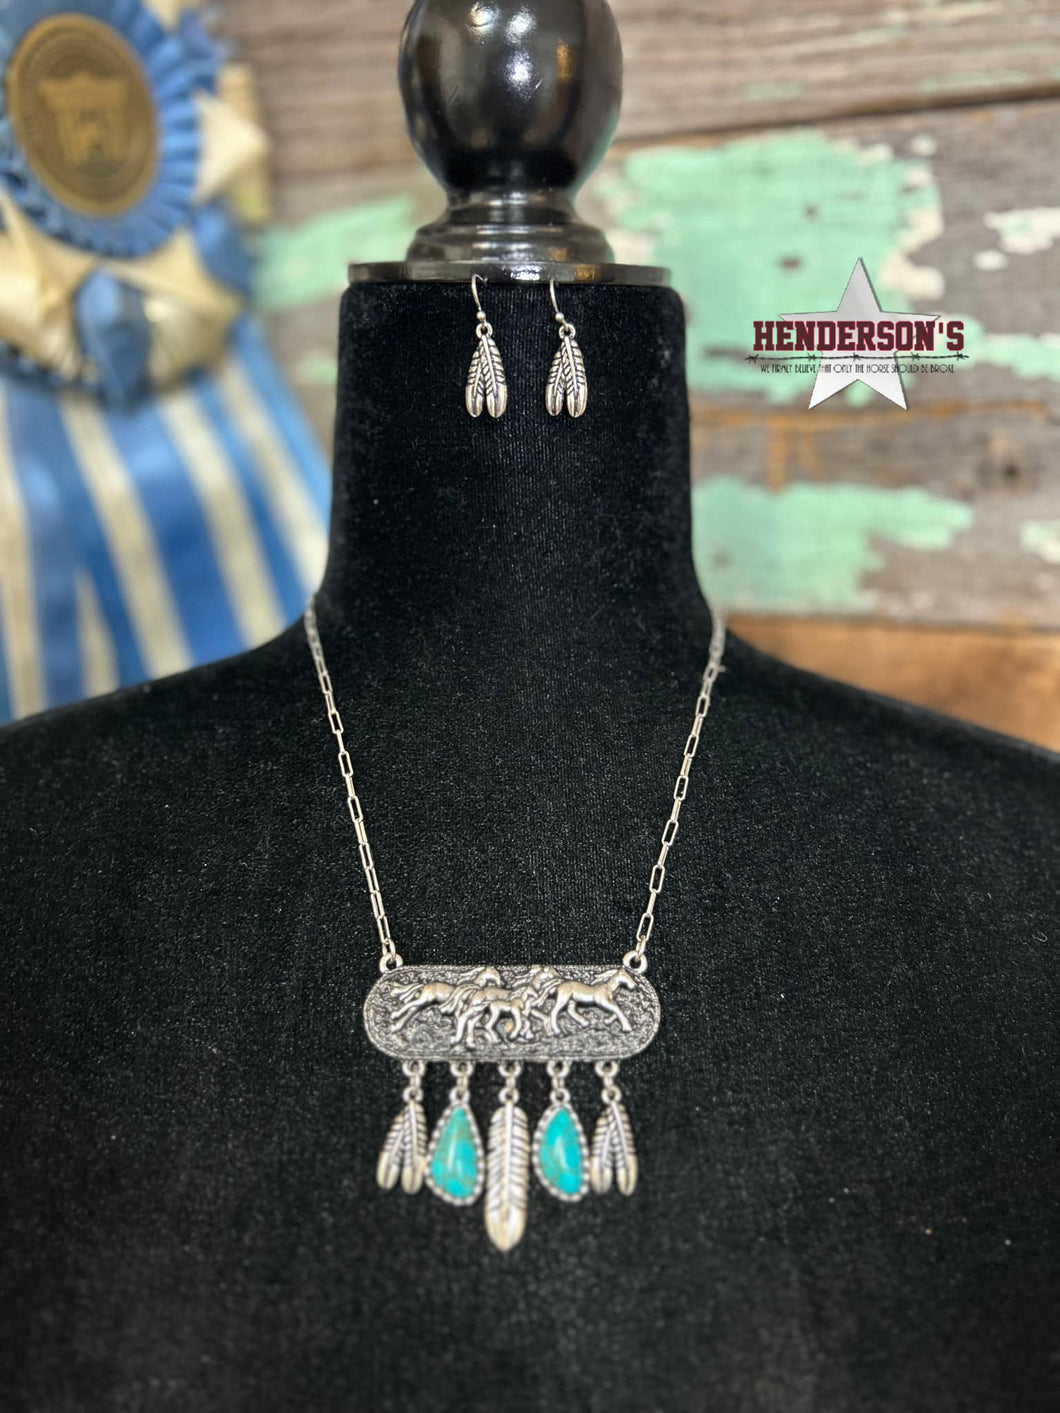 Running Horse W/Feathers Necklace Set - Henderson's Western Store